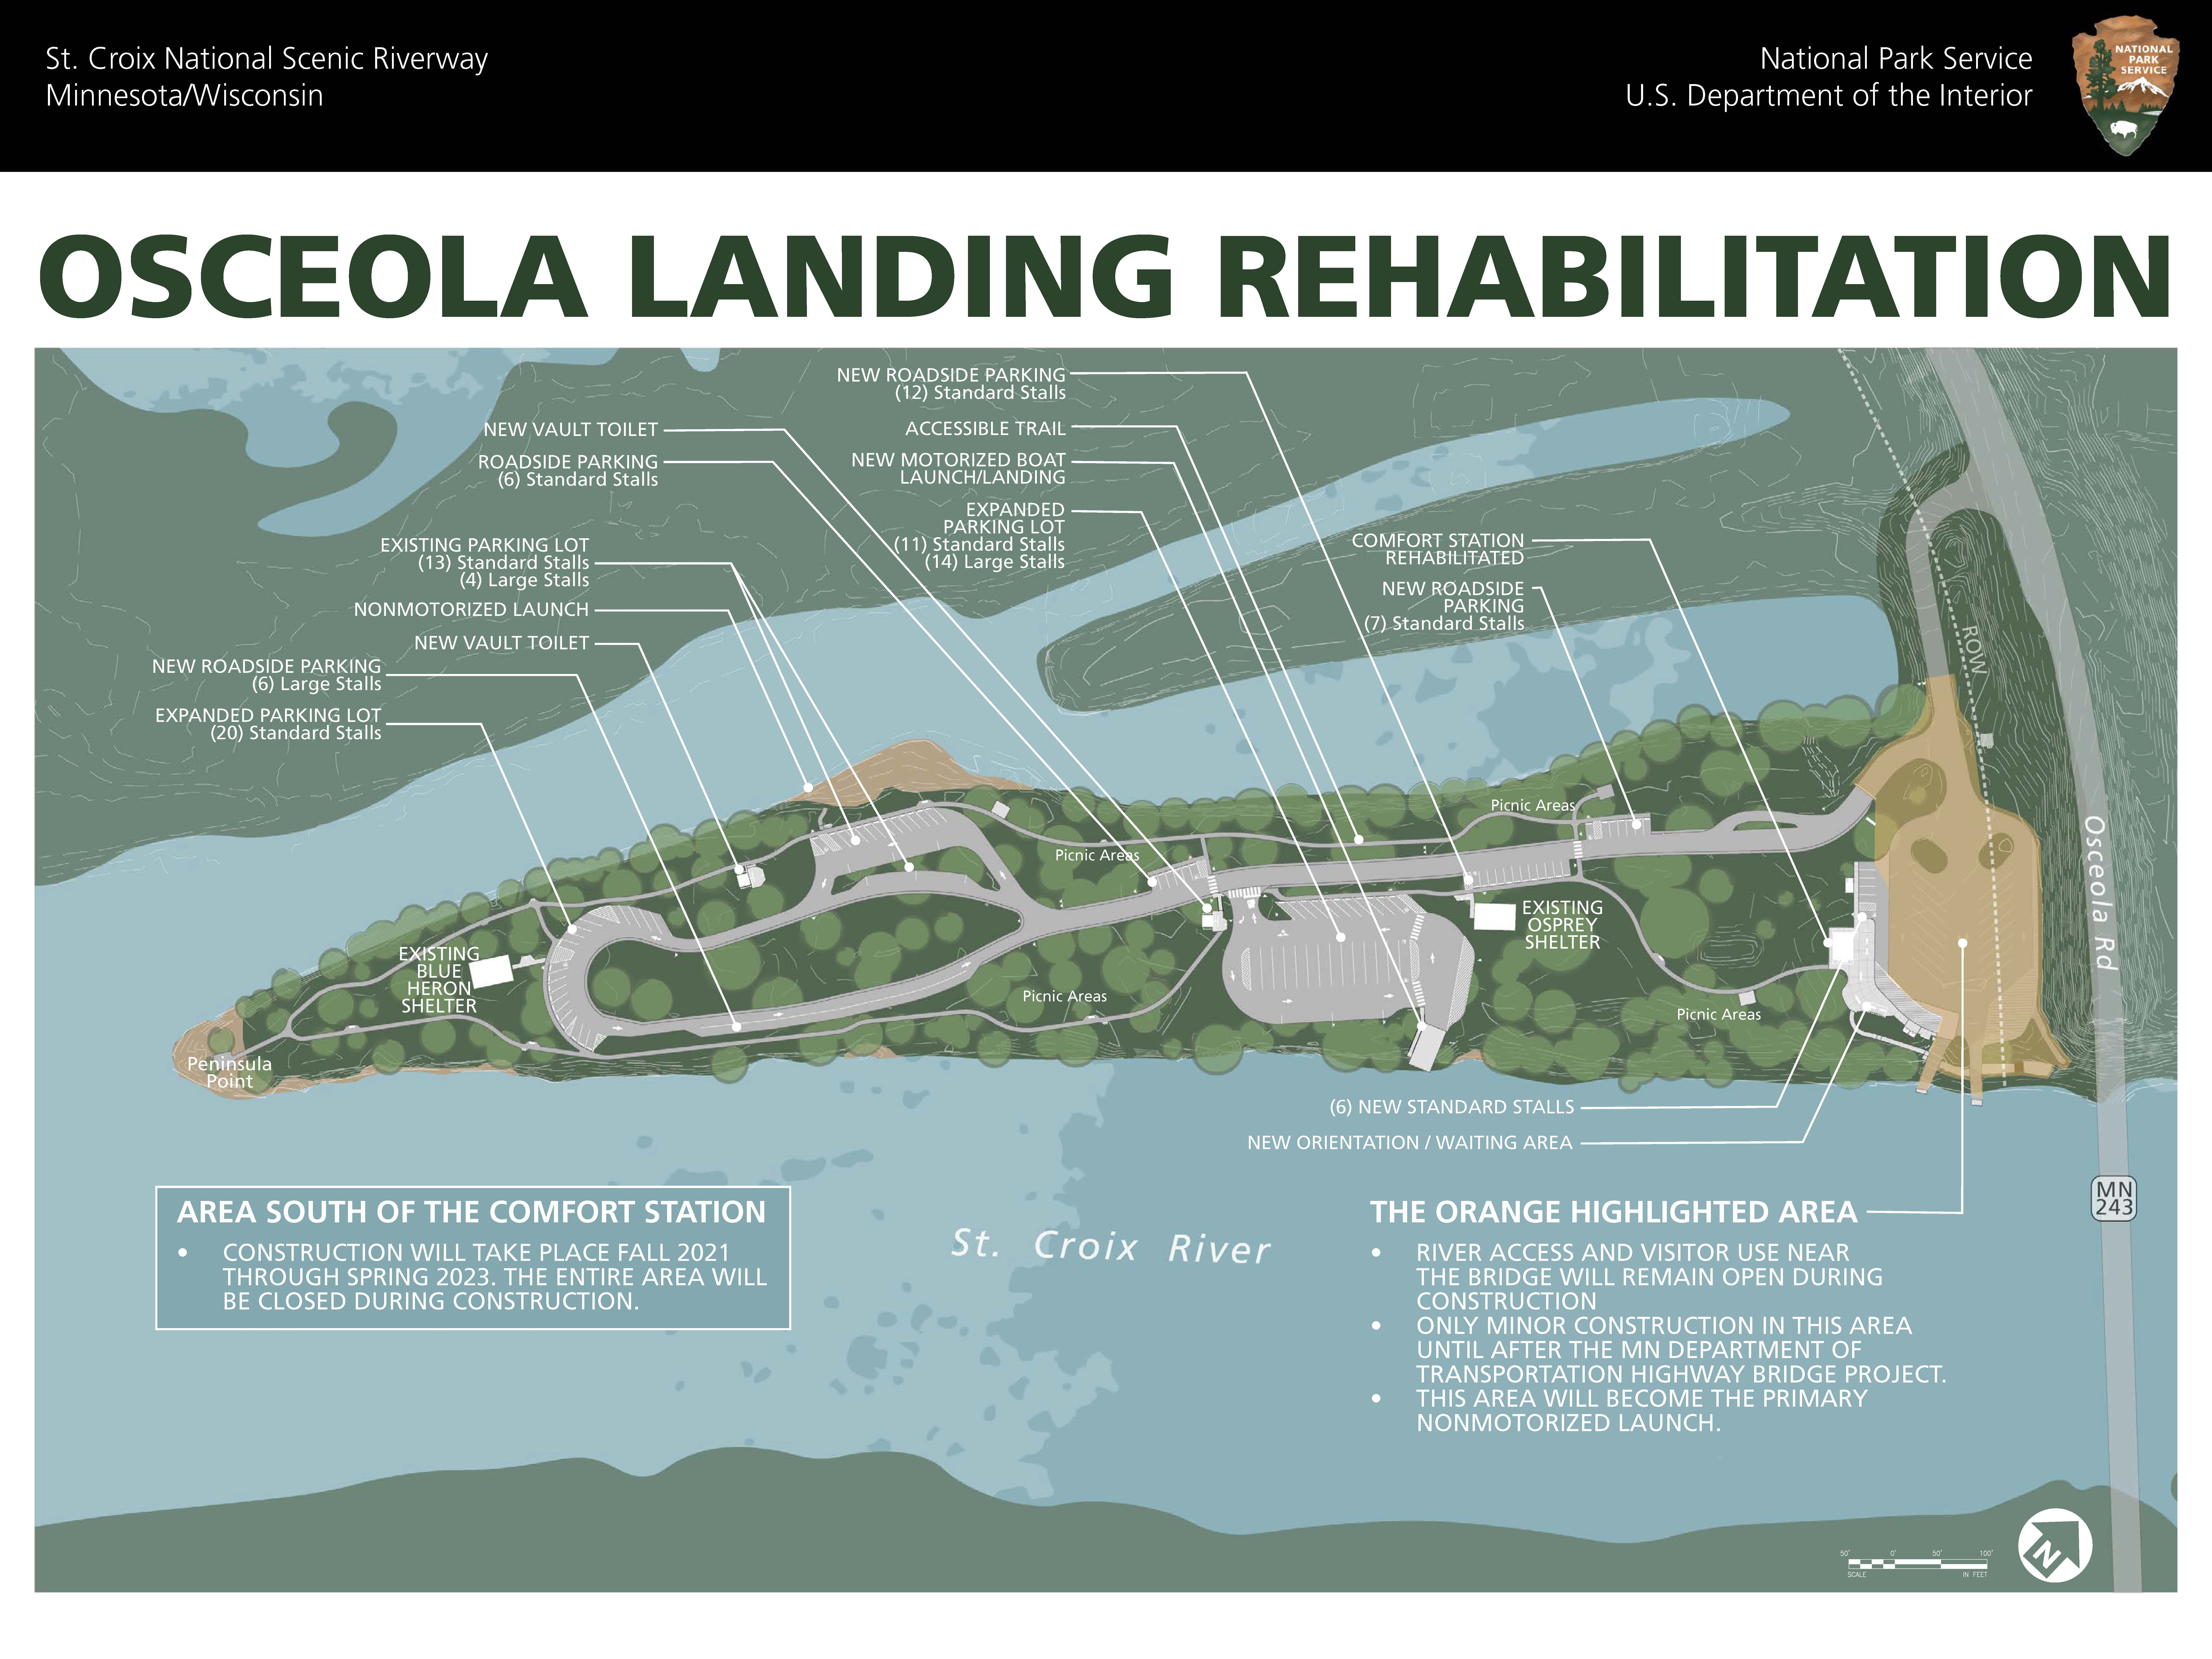 Map of Osceola Landing Rehabilitation with dots indicating where changes are to be made including parking, launches, trails, and toilets.